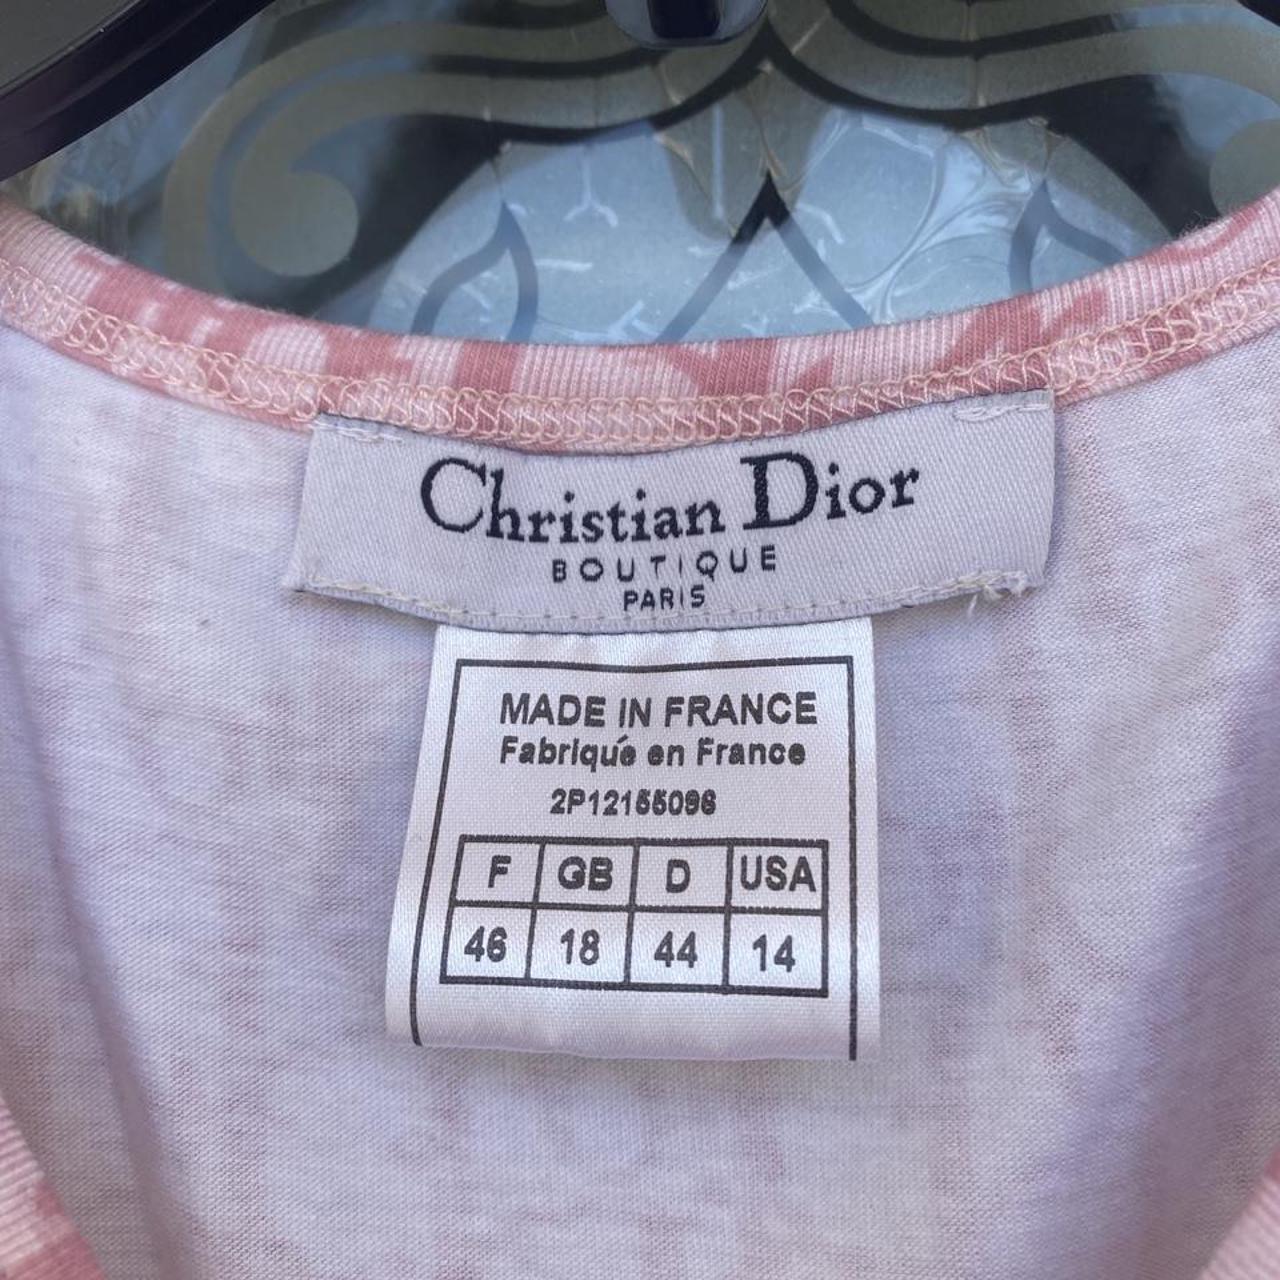 Christian Dior Women's Pink and White Vest | Depop